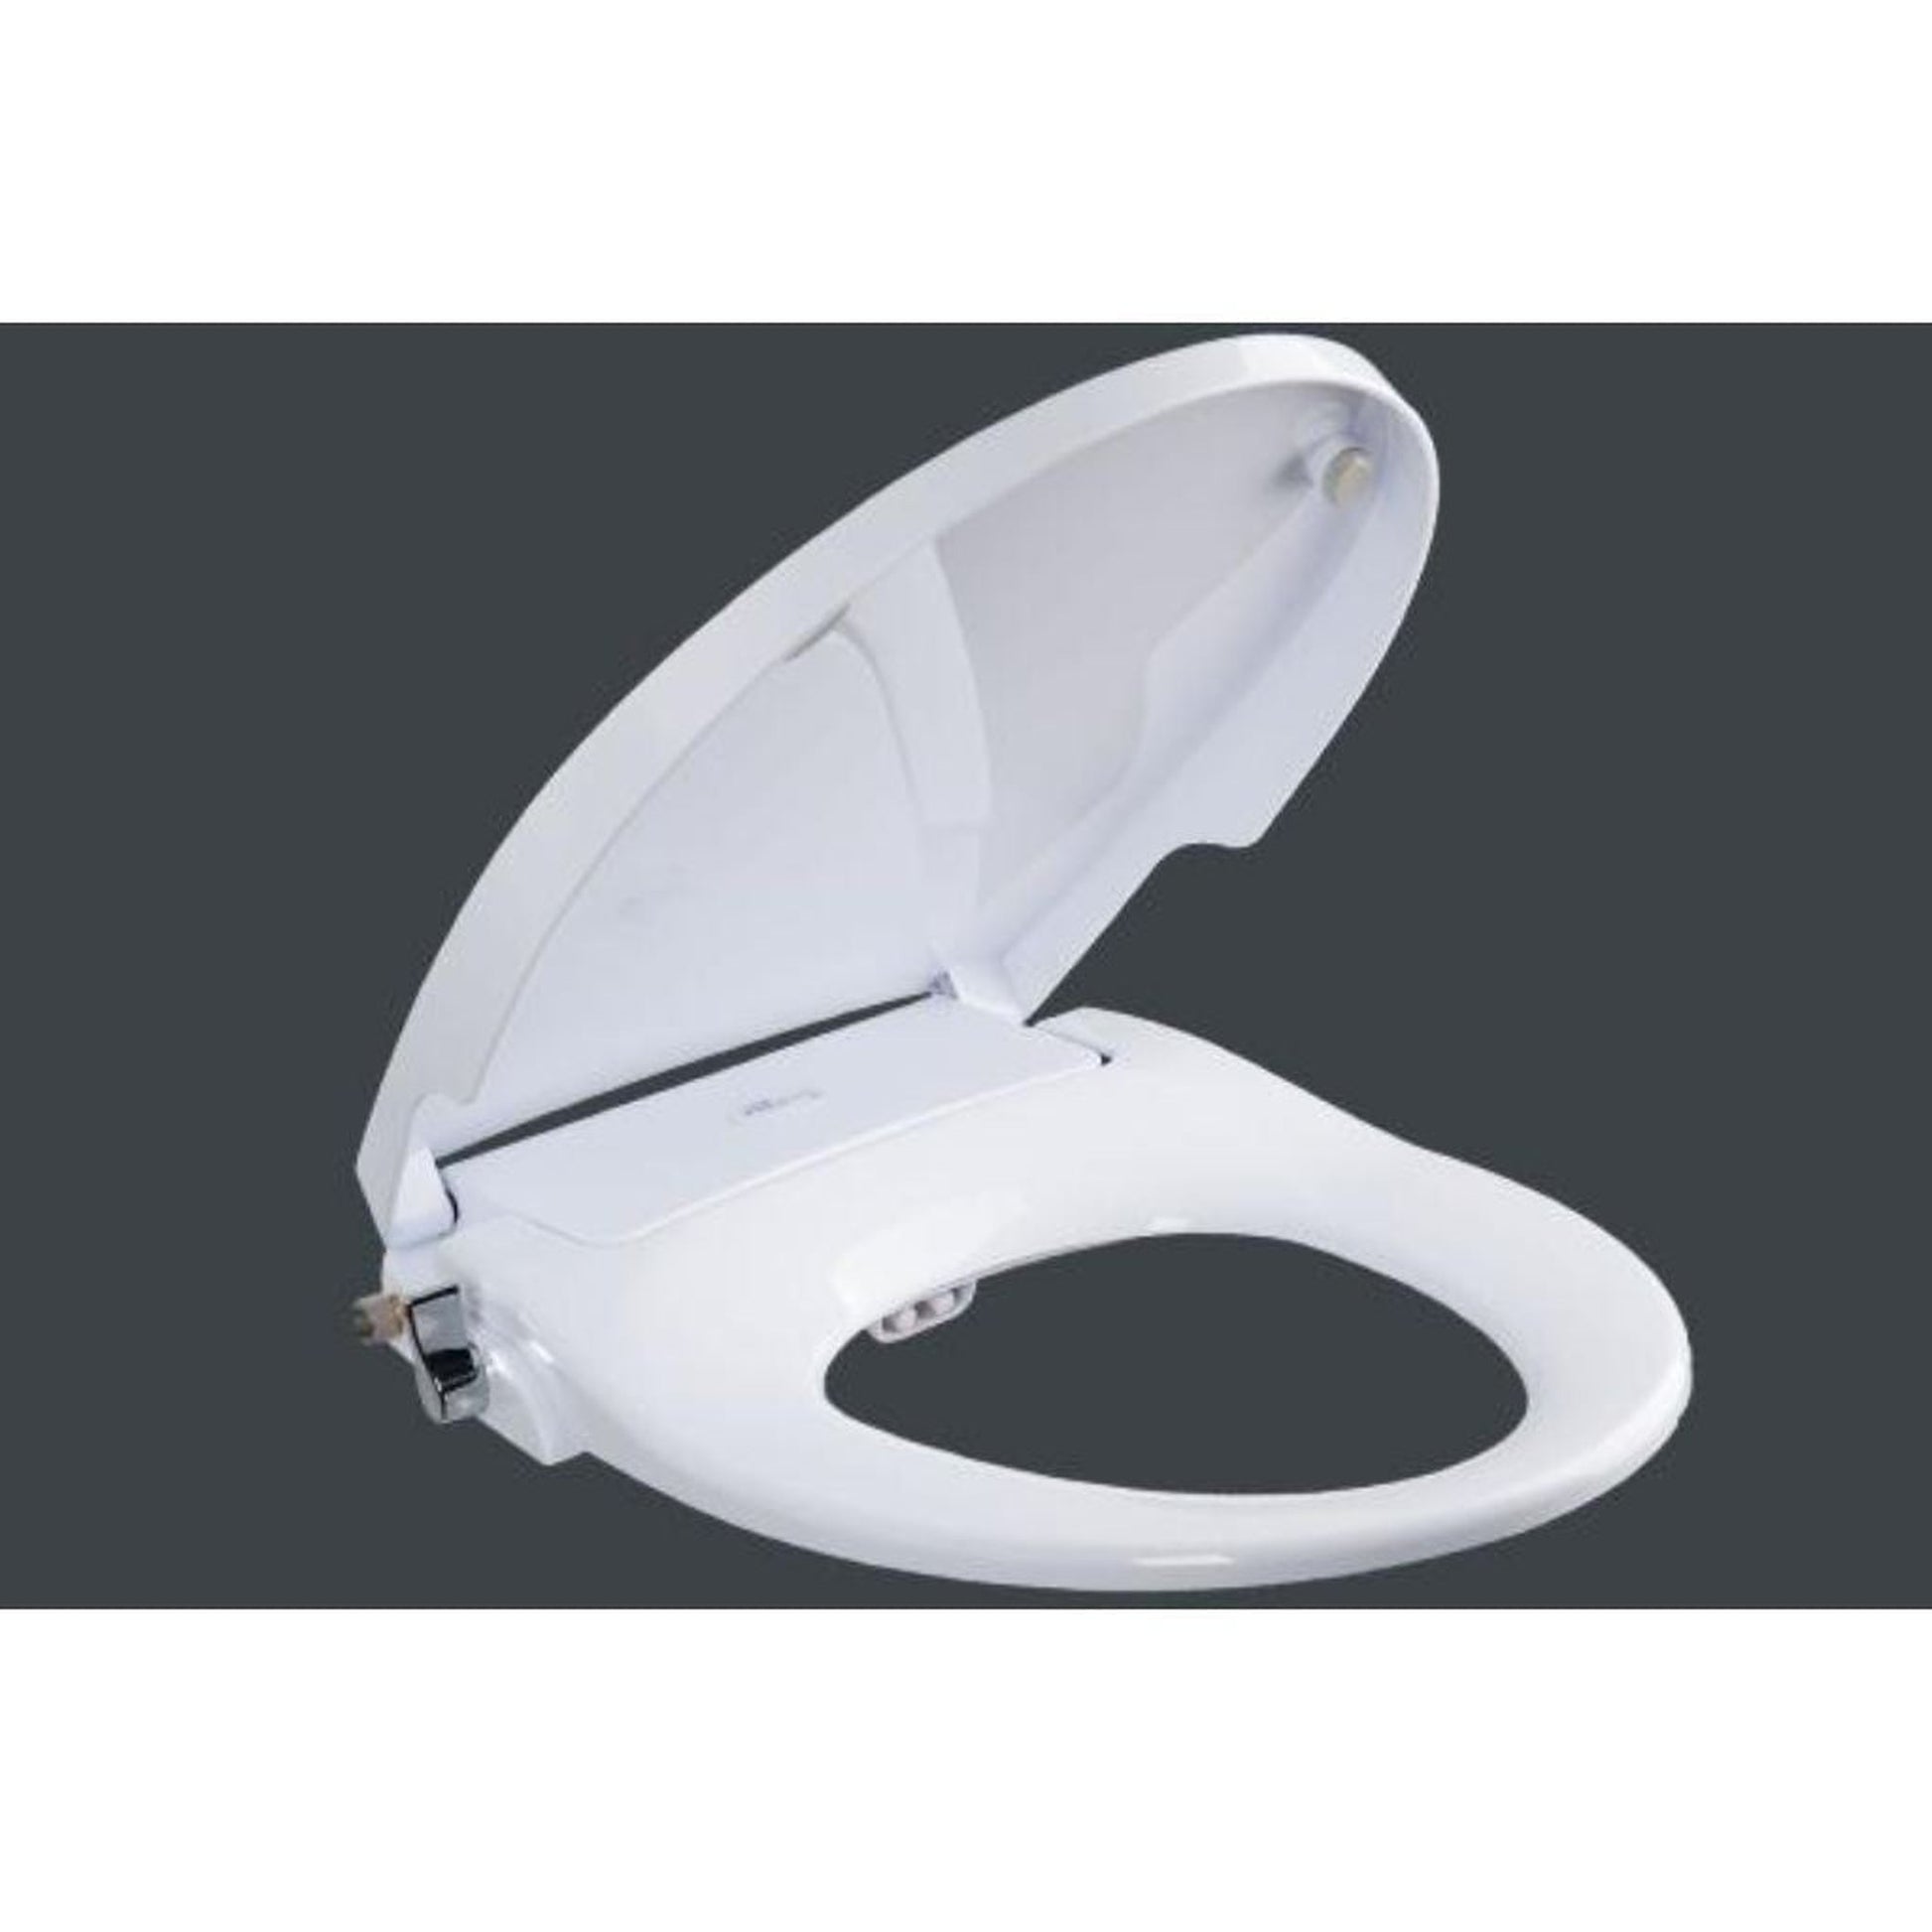 Clear Rear Bidet Attachment for Toilet - Get a Splash of Freshness w/Our  Self-Cleaning Bidet - Dual Nozzle Toilet Bidet Attachment w/Adjustable  Water